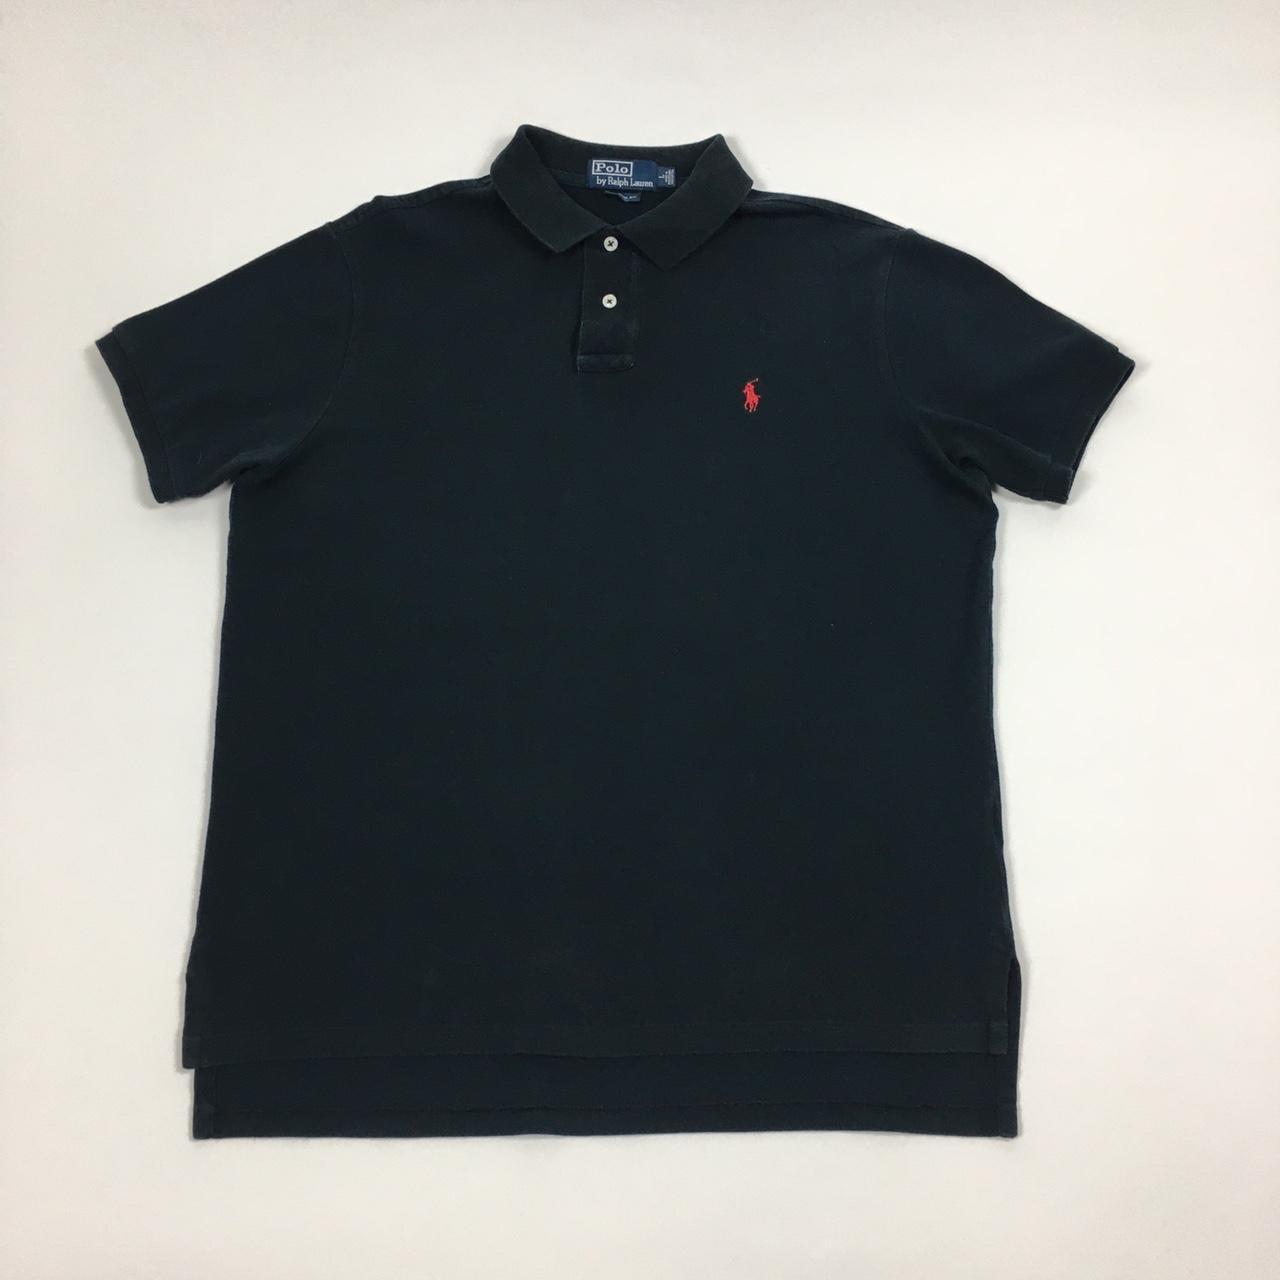 Polo Ralph Lauren Men's Black and Red Polo-shirts